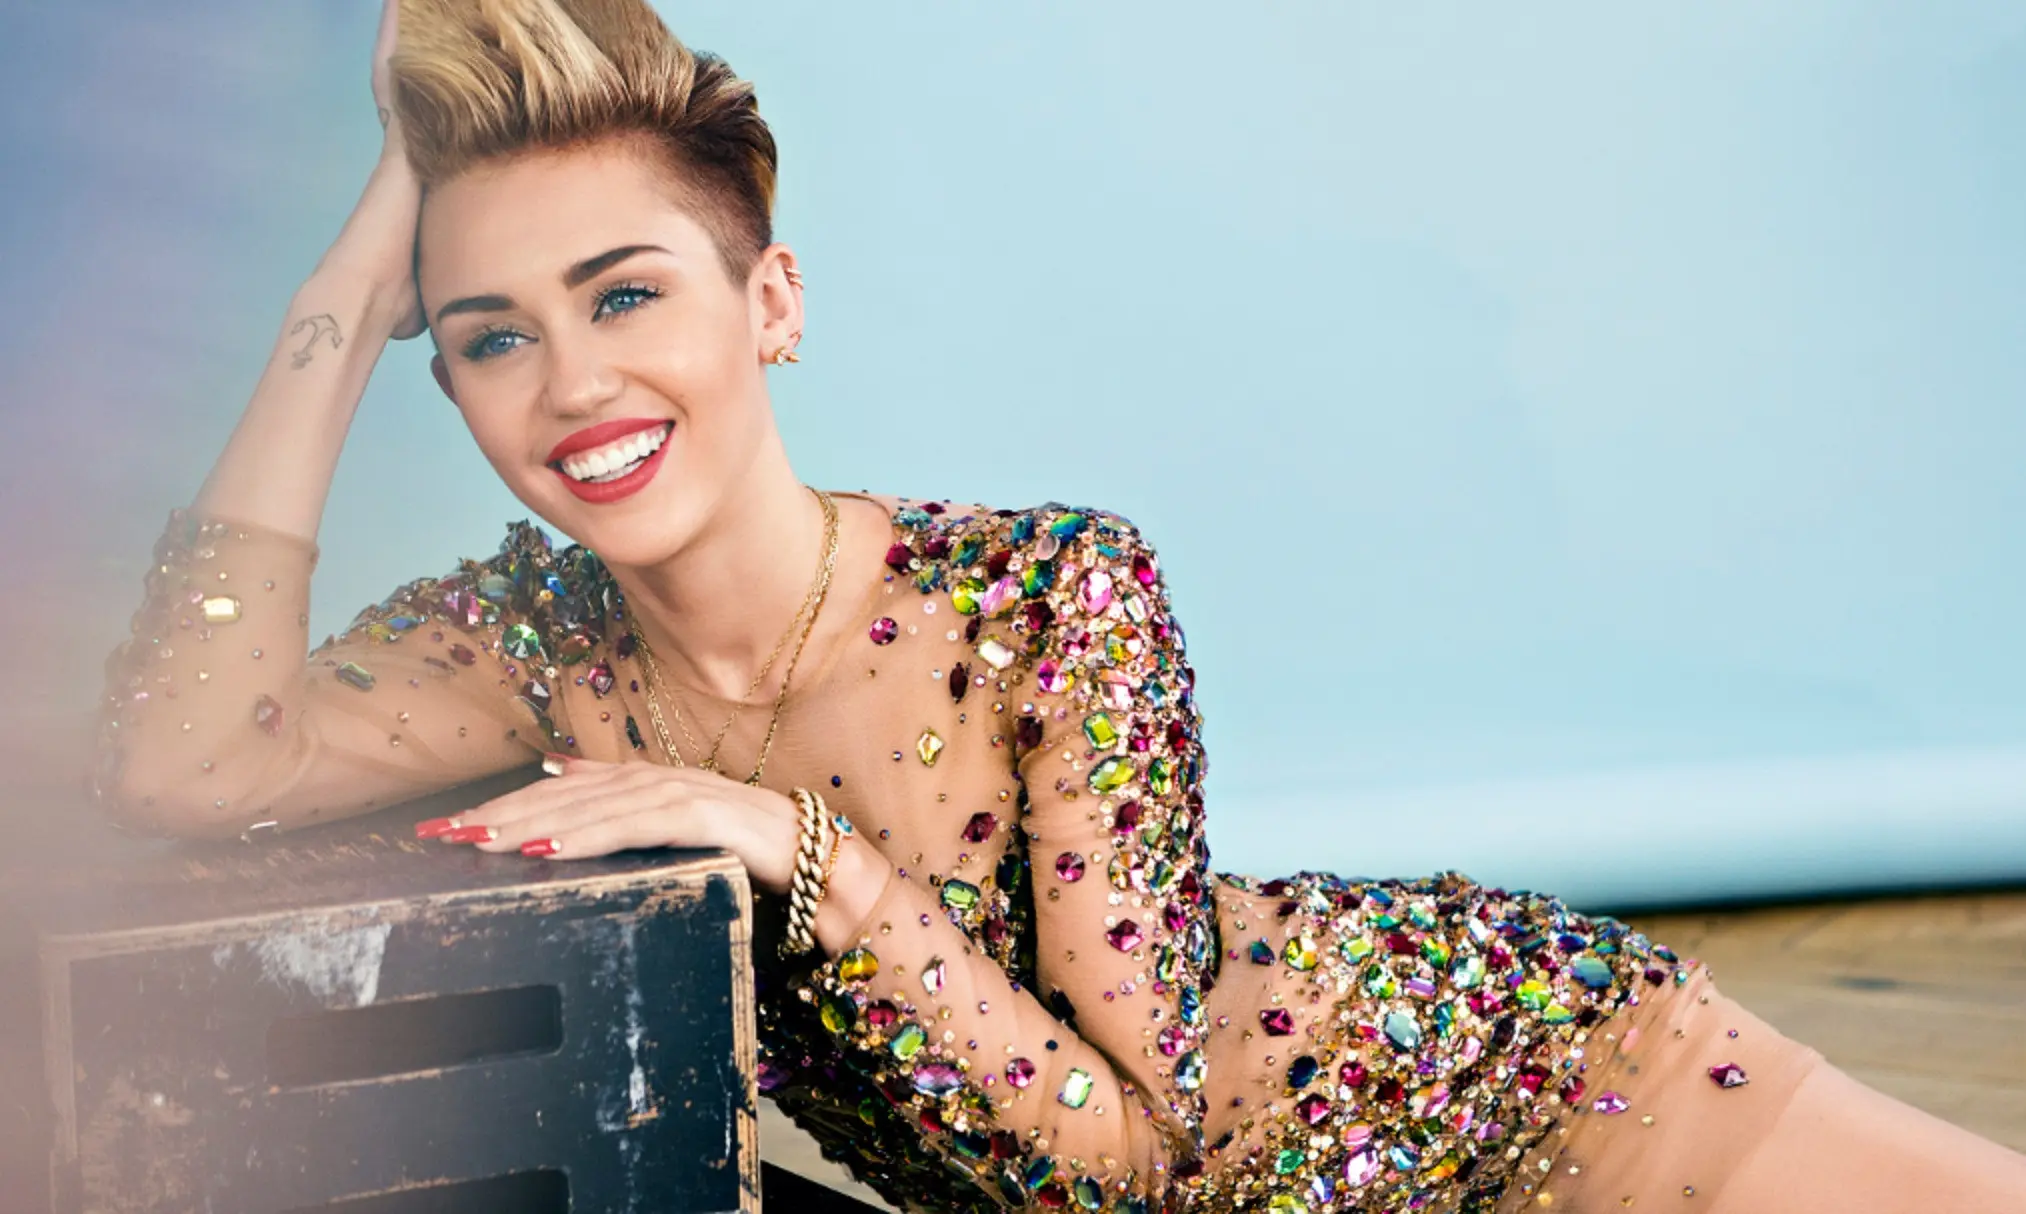 Miley Cyrus (The Huffington Post)